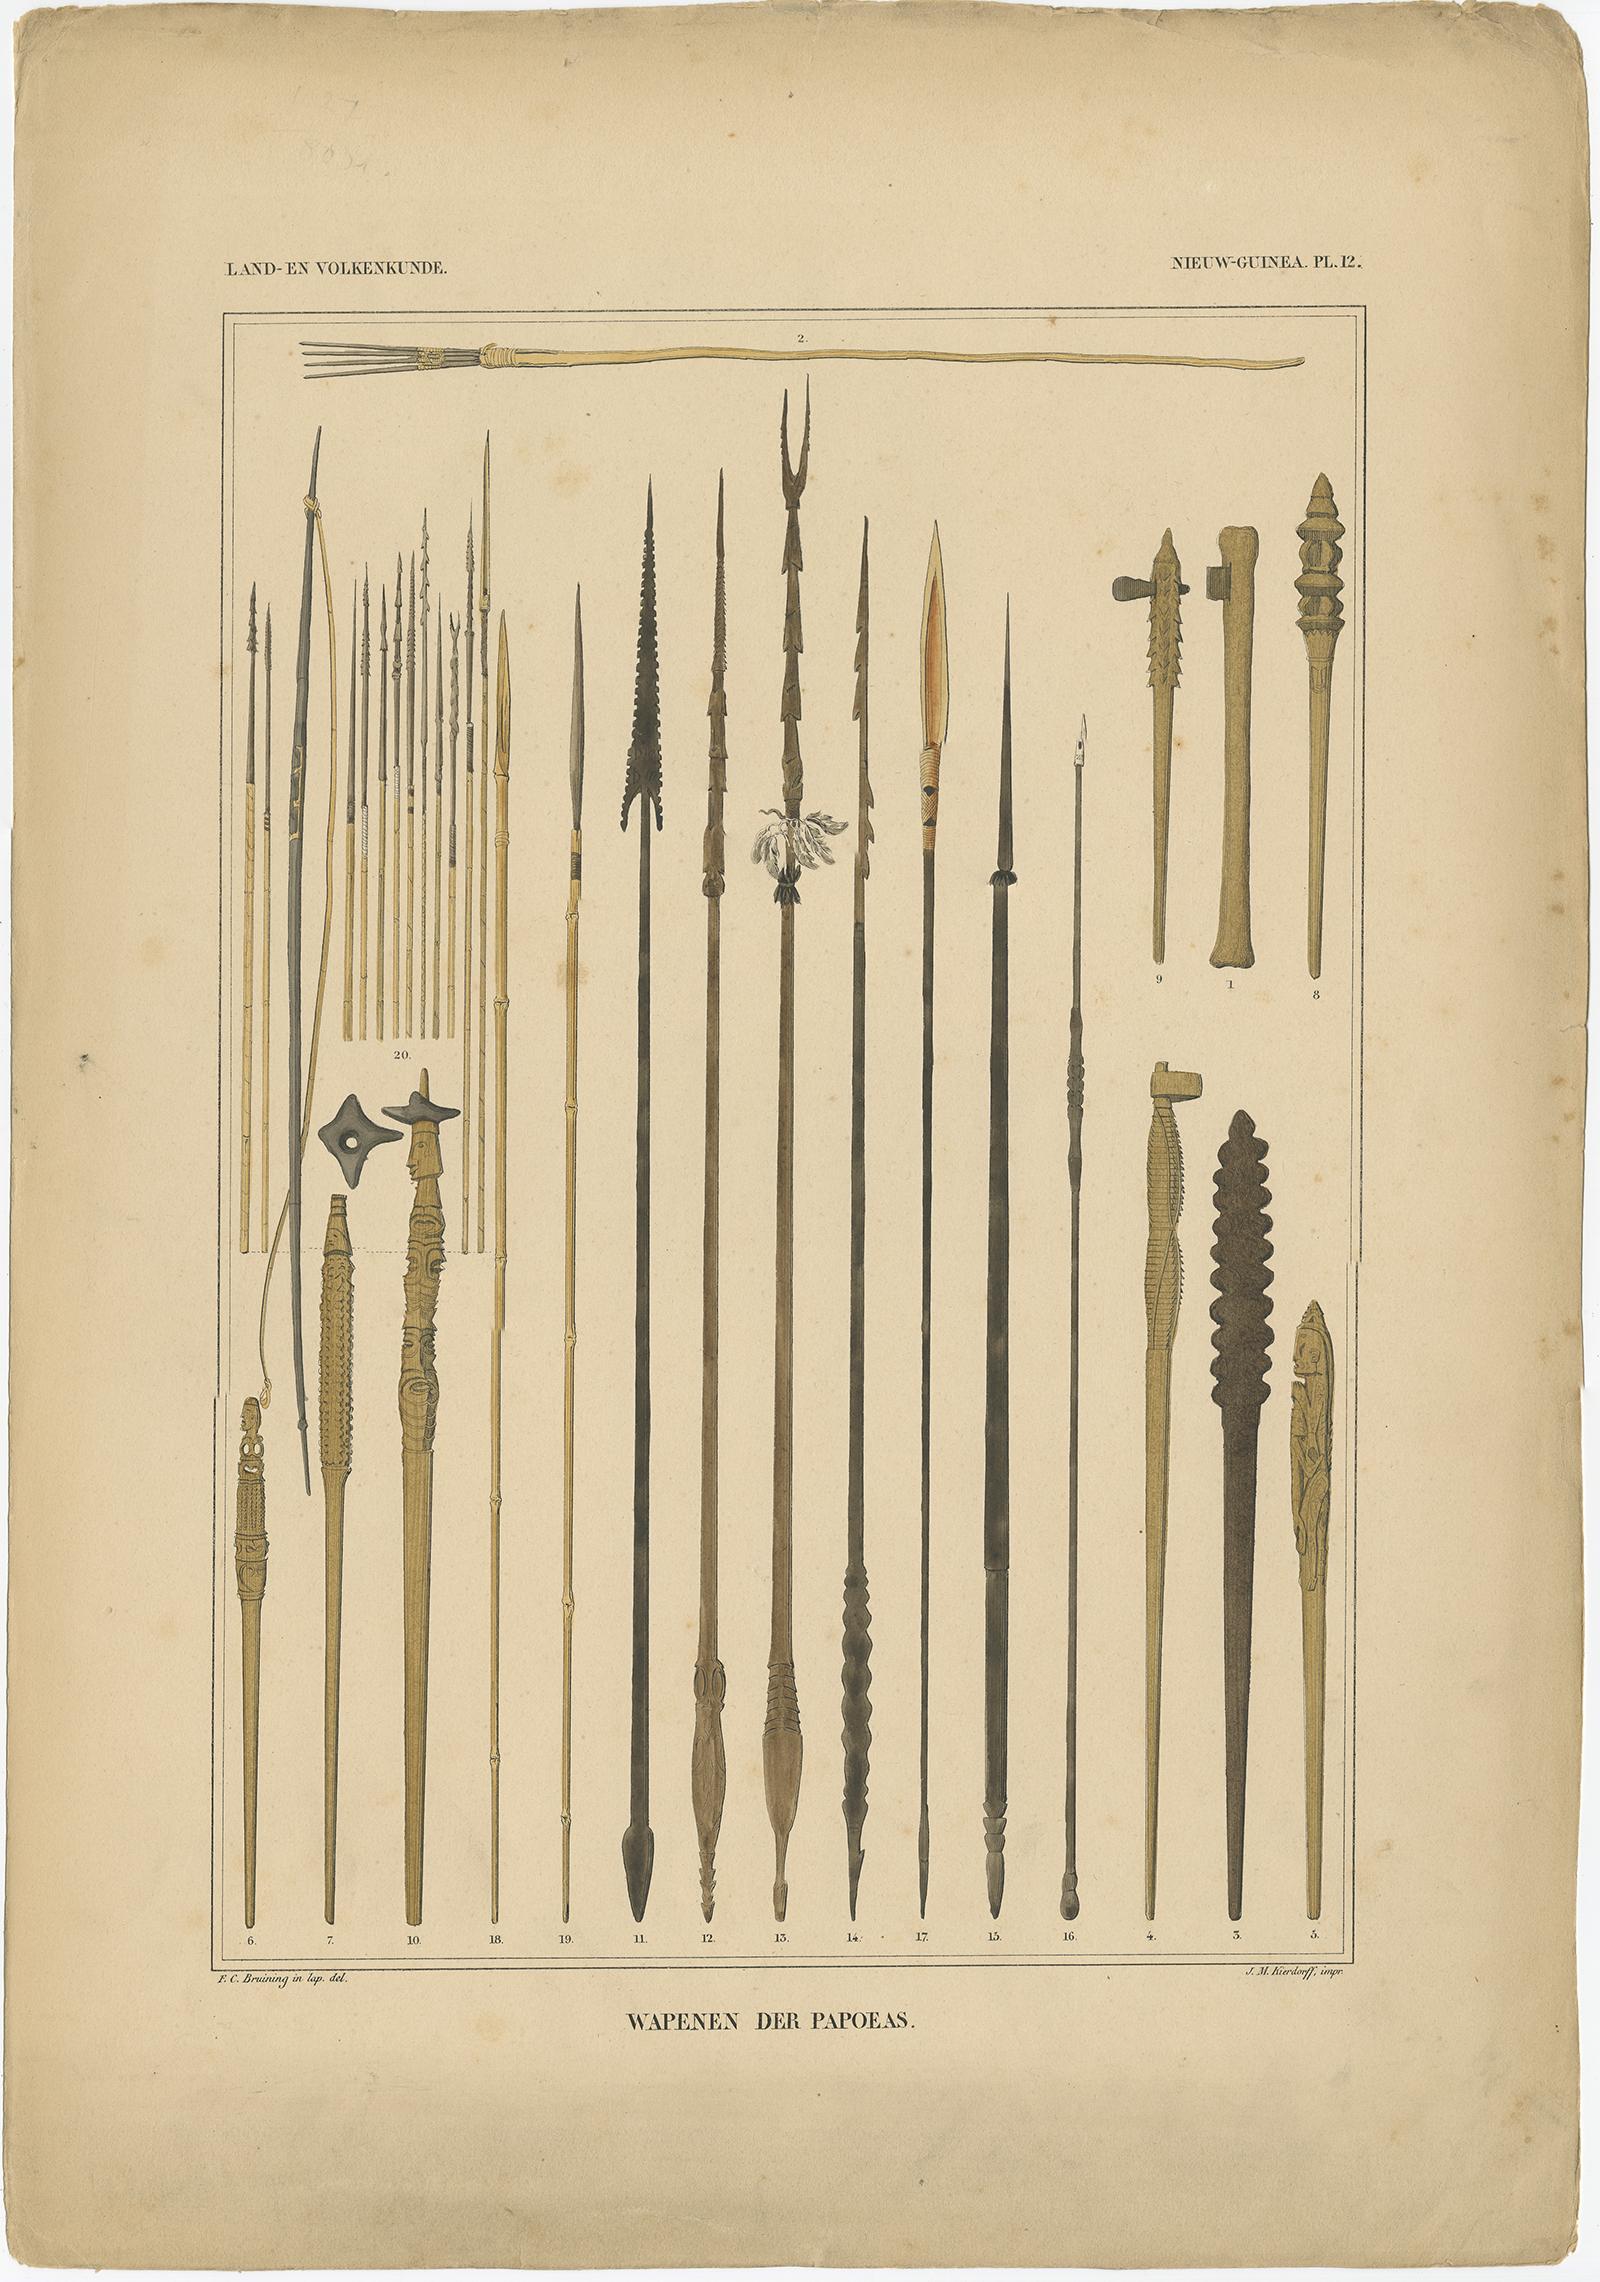 A collection of 7 Antique prints, with the following reference:

Antique Print with Various Furniture of Timor ‘Indonesia’, Temminck, circa 1840
Print with Weapons of Papua 'New Guinea, Indonesia' by Temminck, circa 1840
Print with Items of